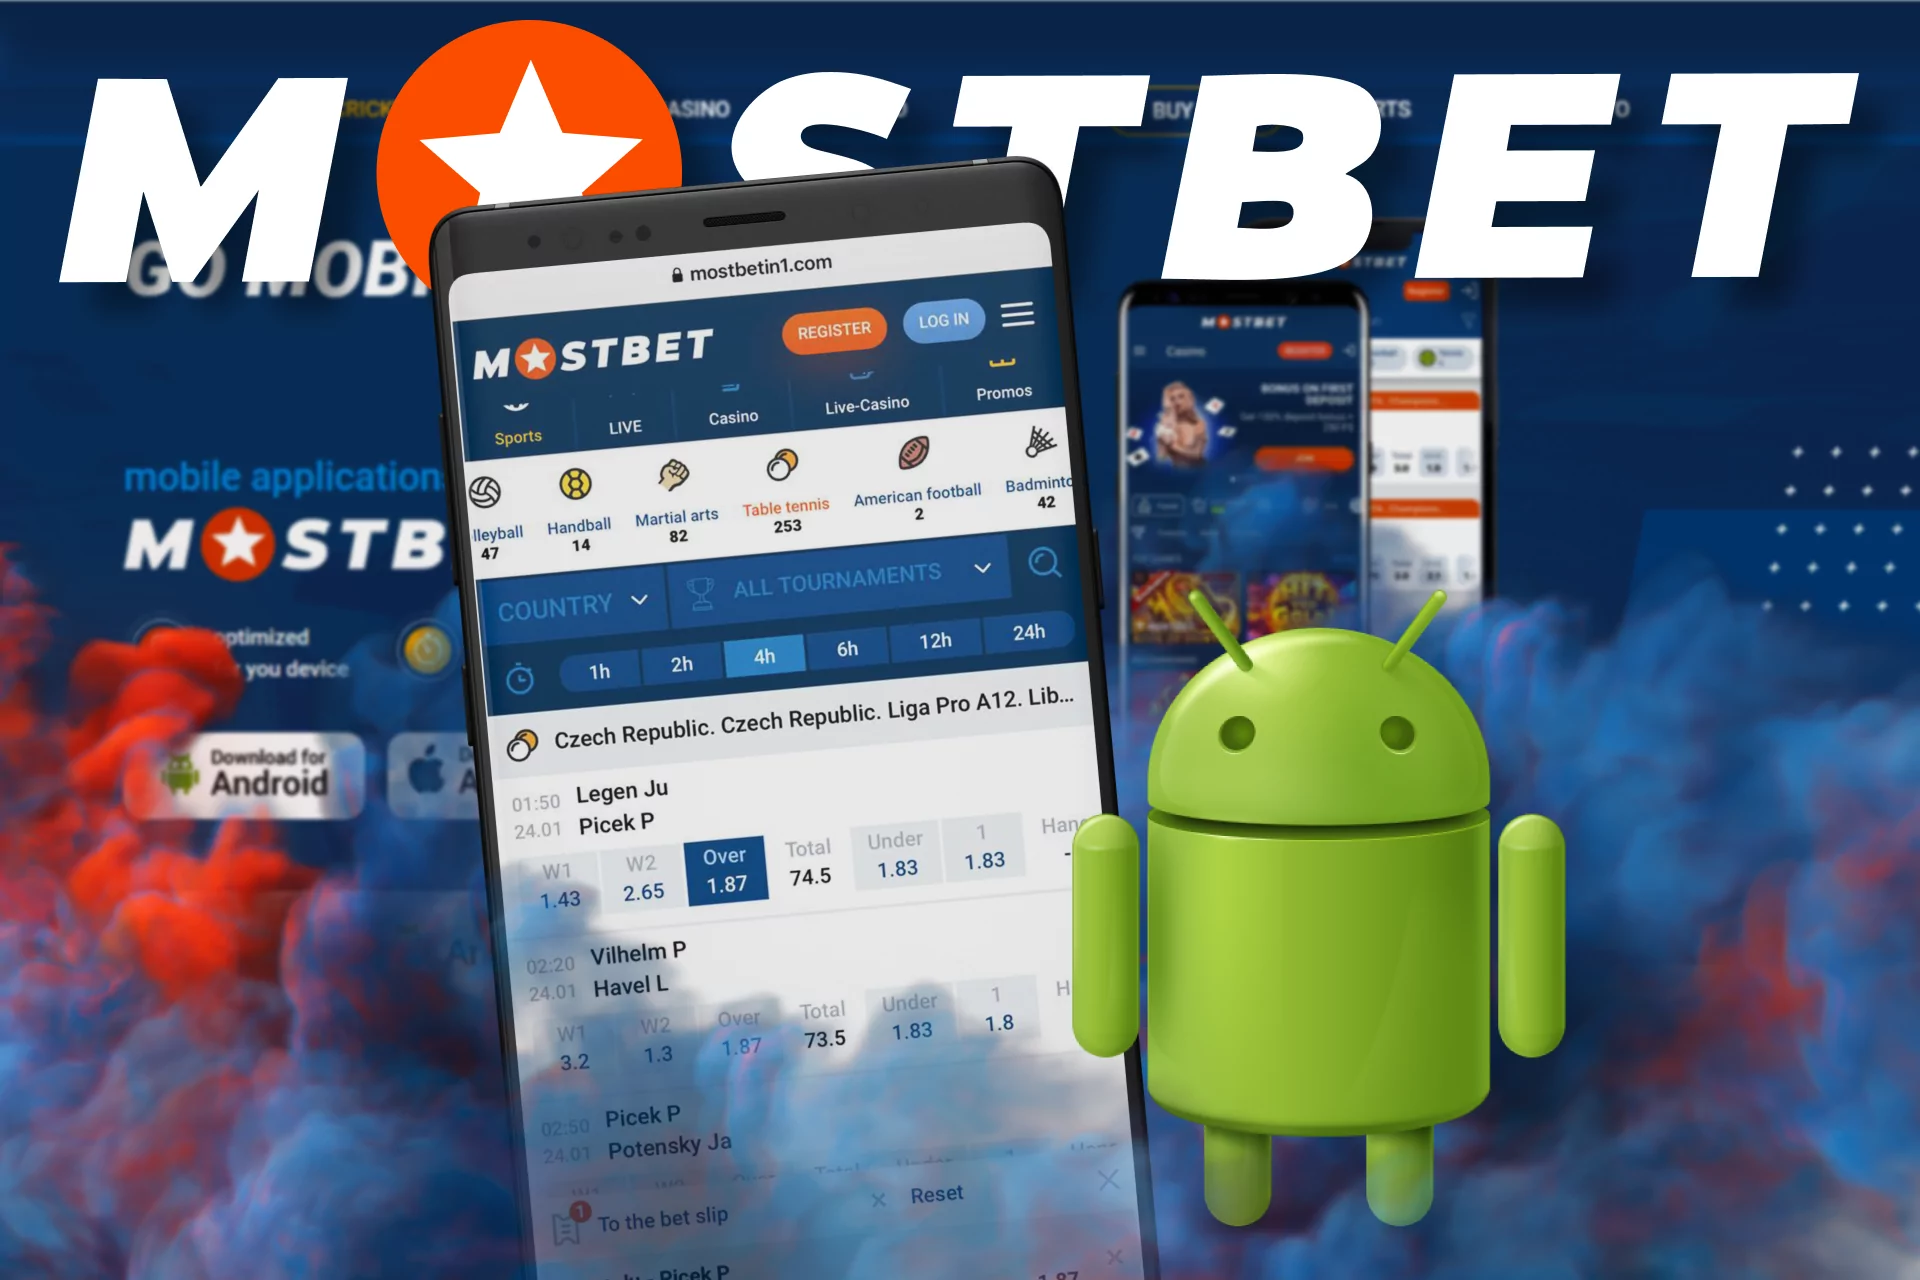 In the Mostbet app you can bet on table tennis right on your Android device.